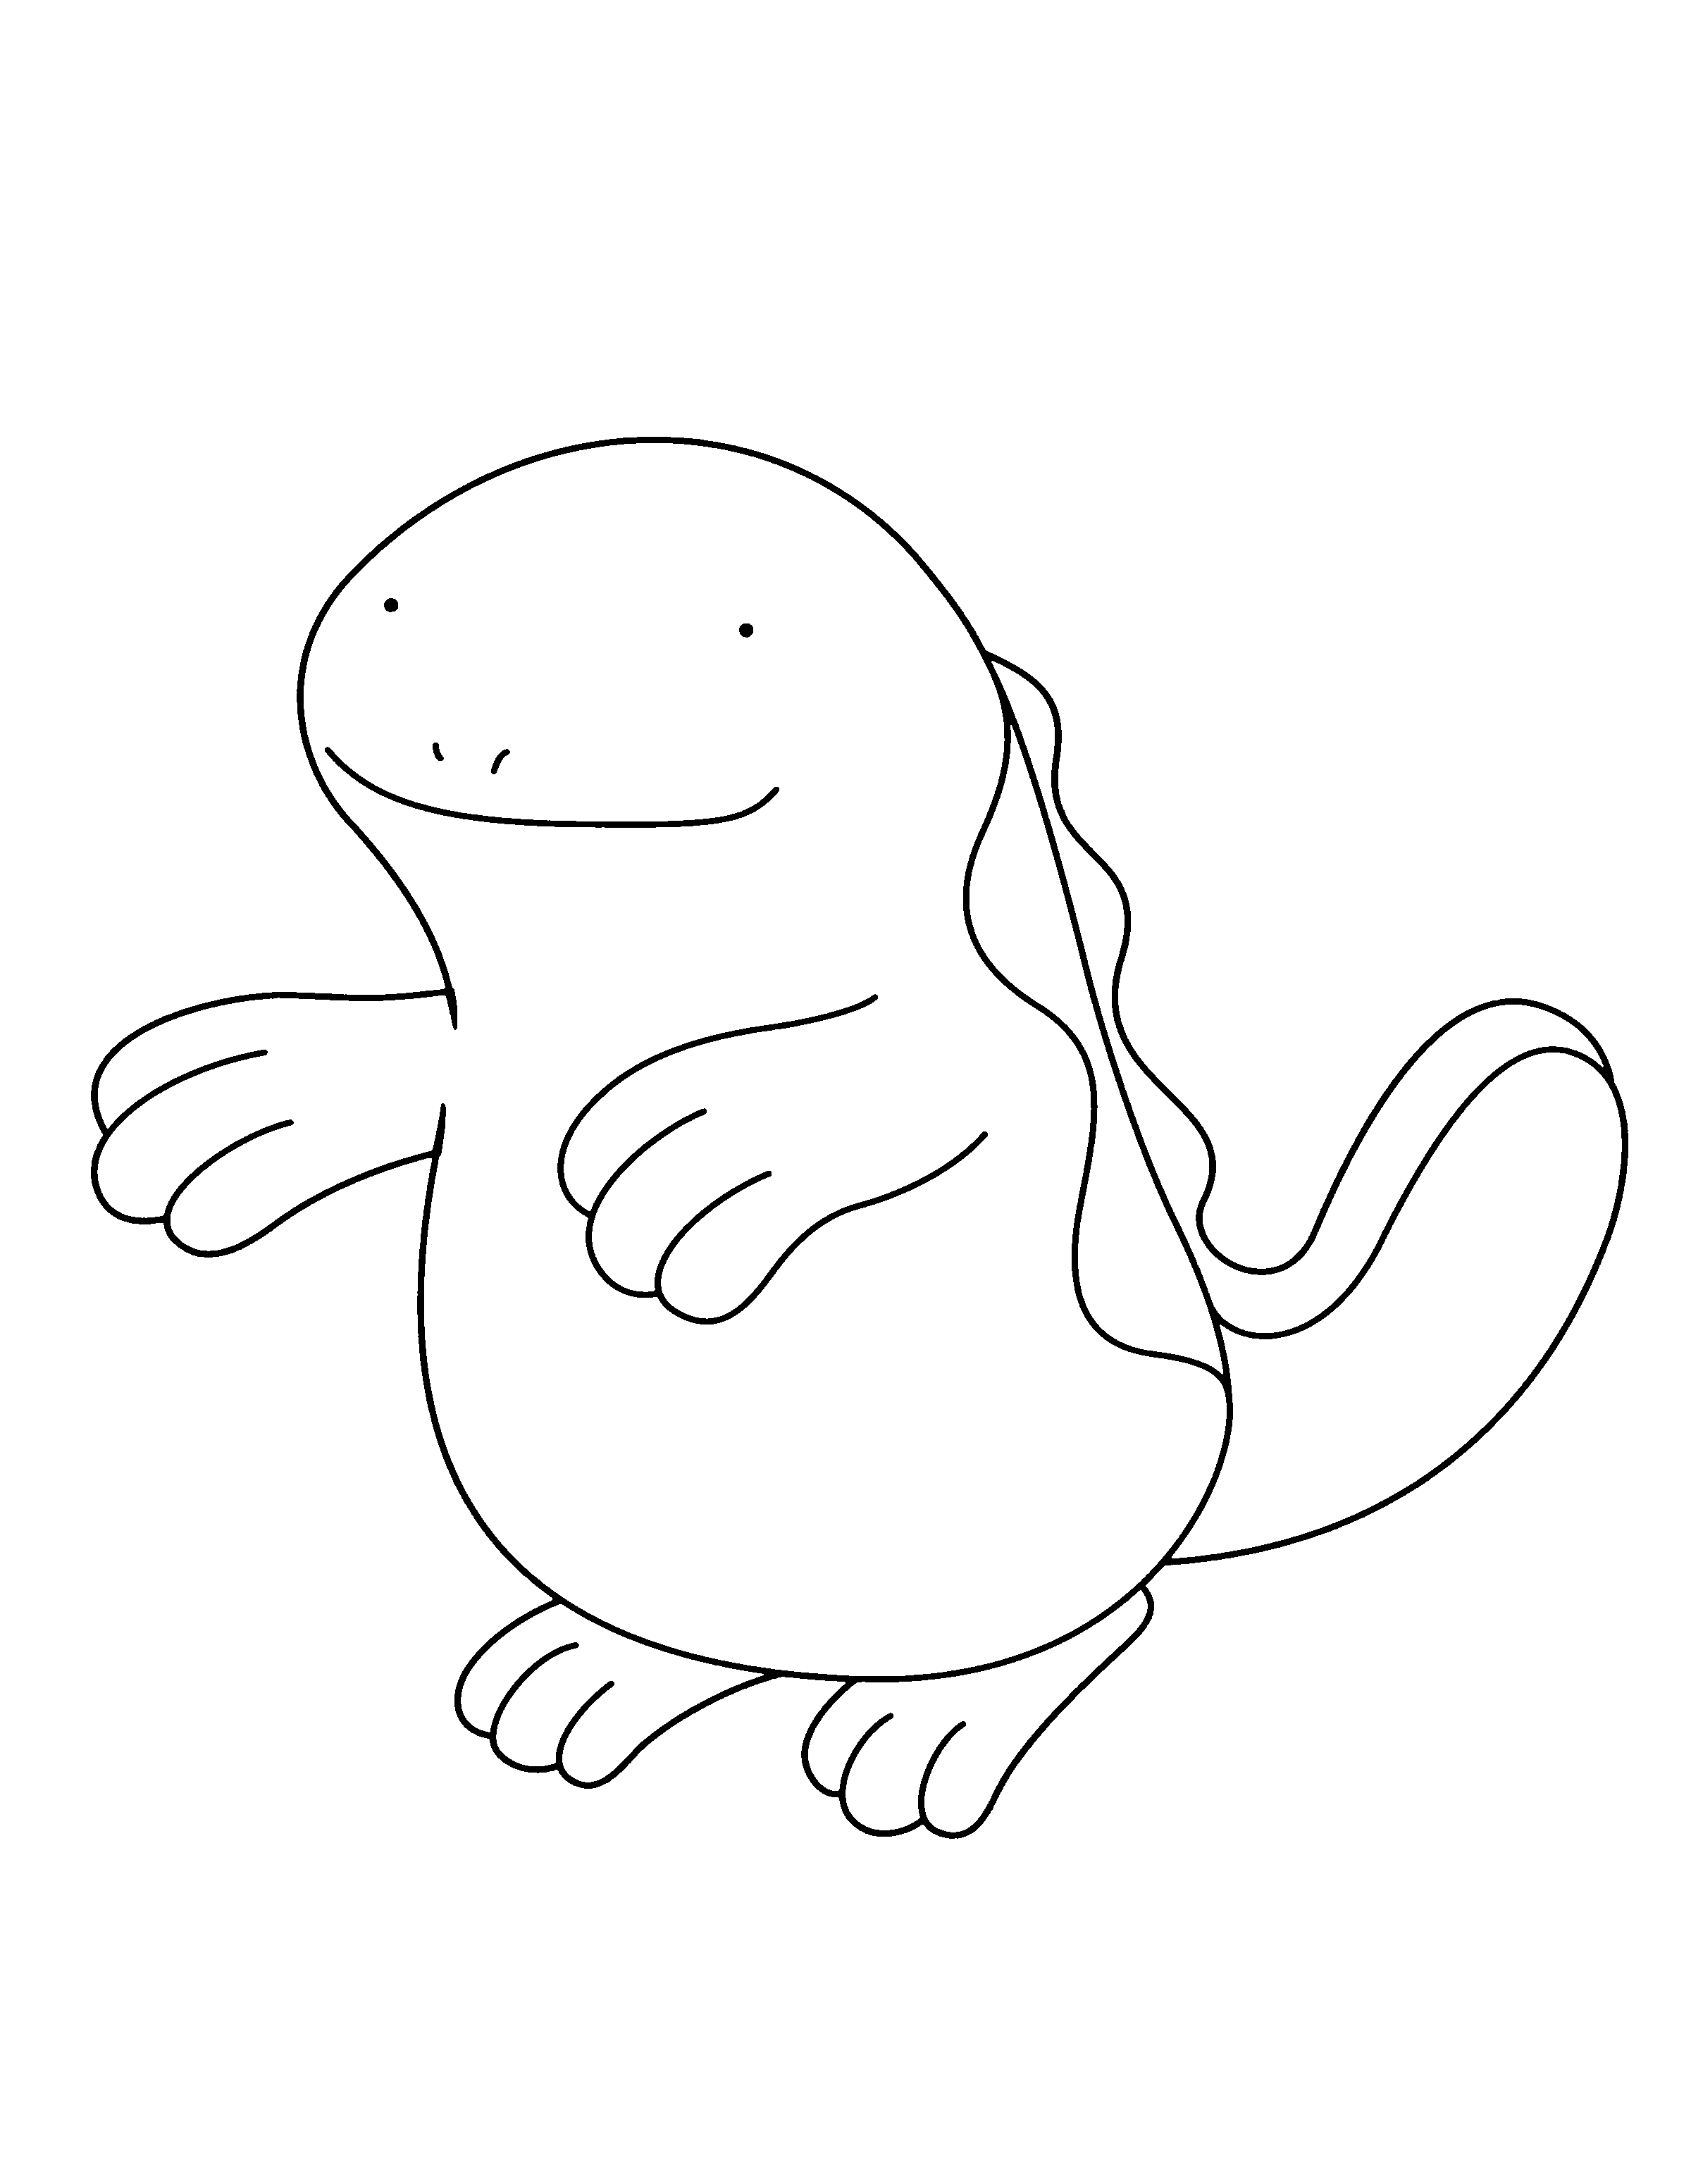 animated-coloring-pages-pokemon-image-0204